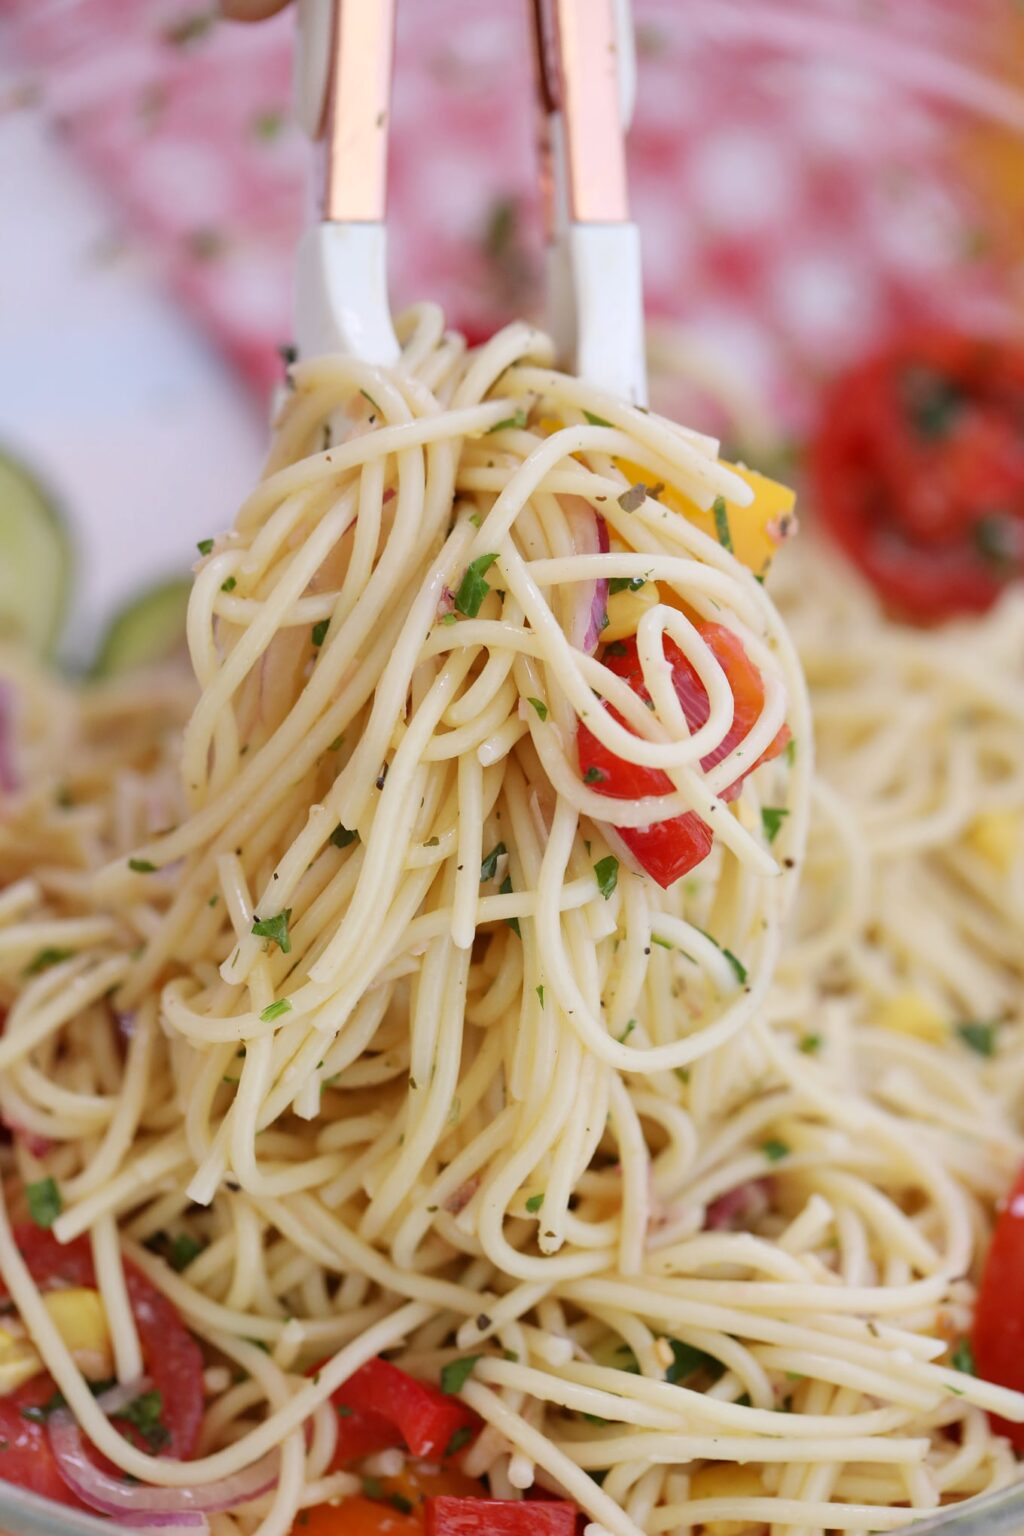 Cold Spaghetti Pasta Salad Recipe [video] - Sweet and Savory Meals